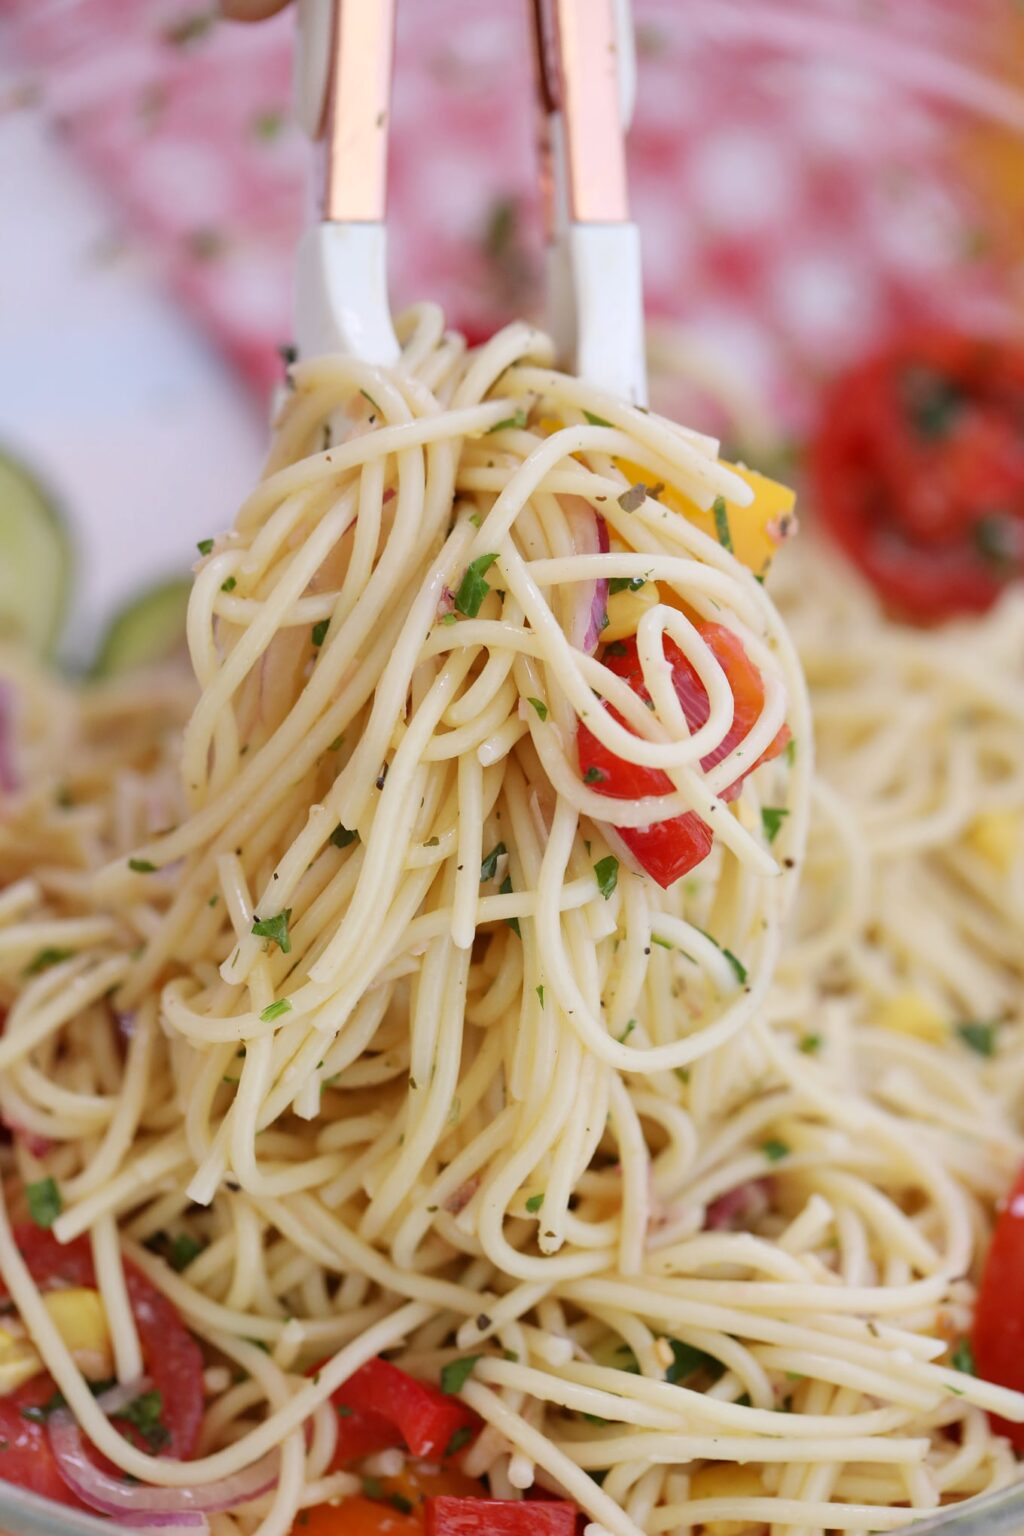 Cold Spaghetti Pasta Salad Recipe [video] - Sweet and Savory Meals